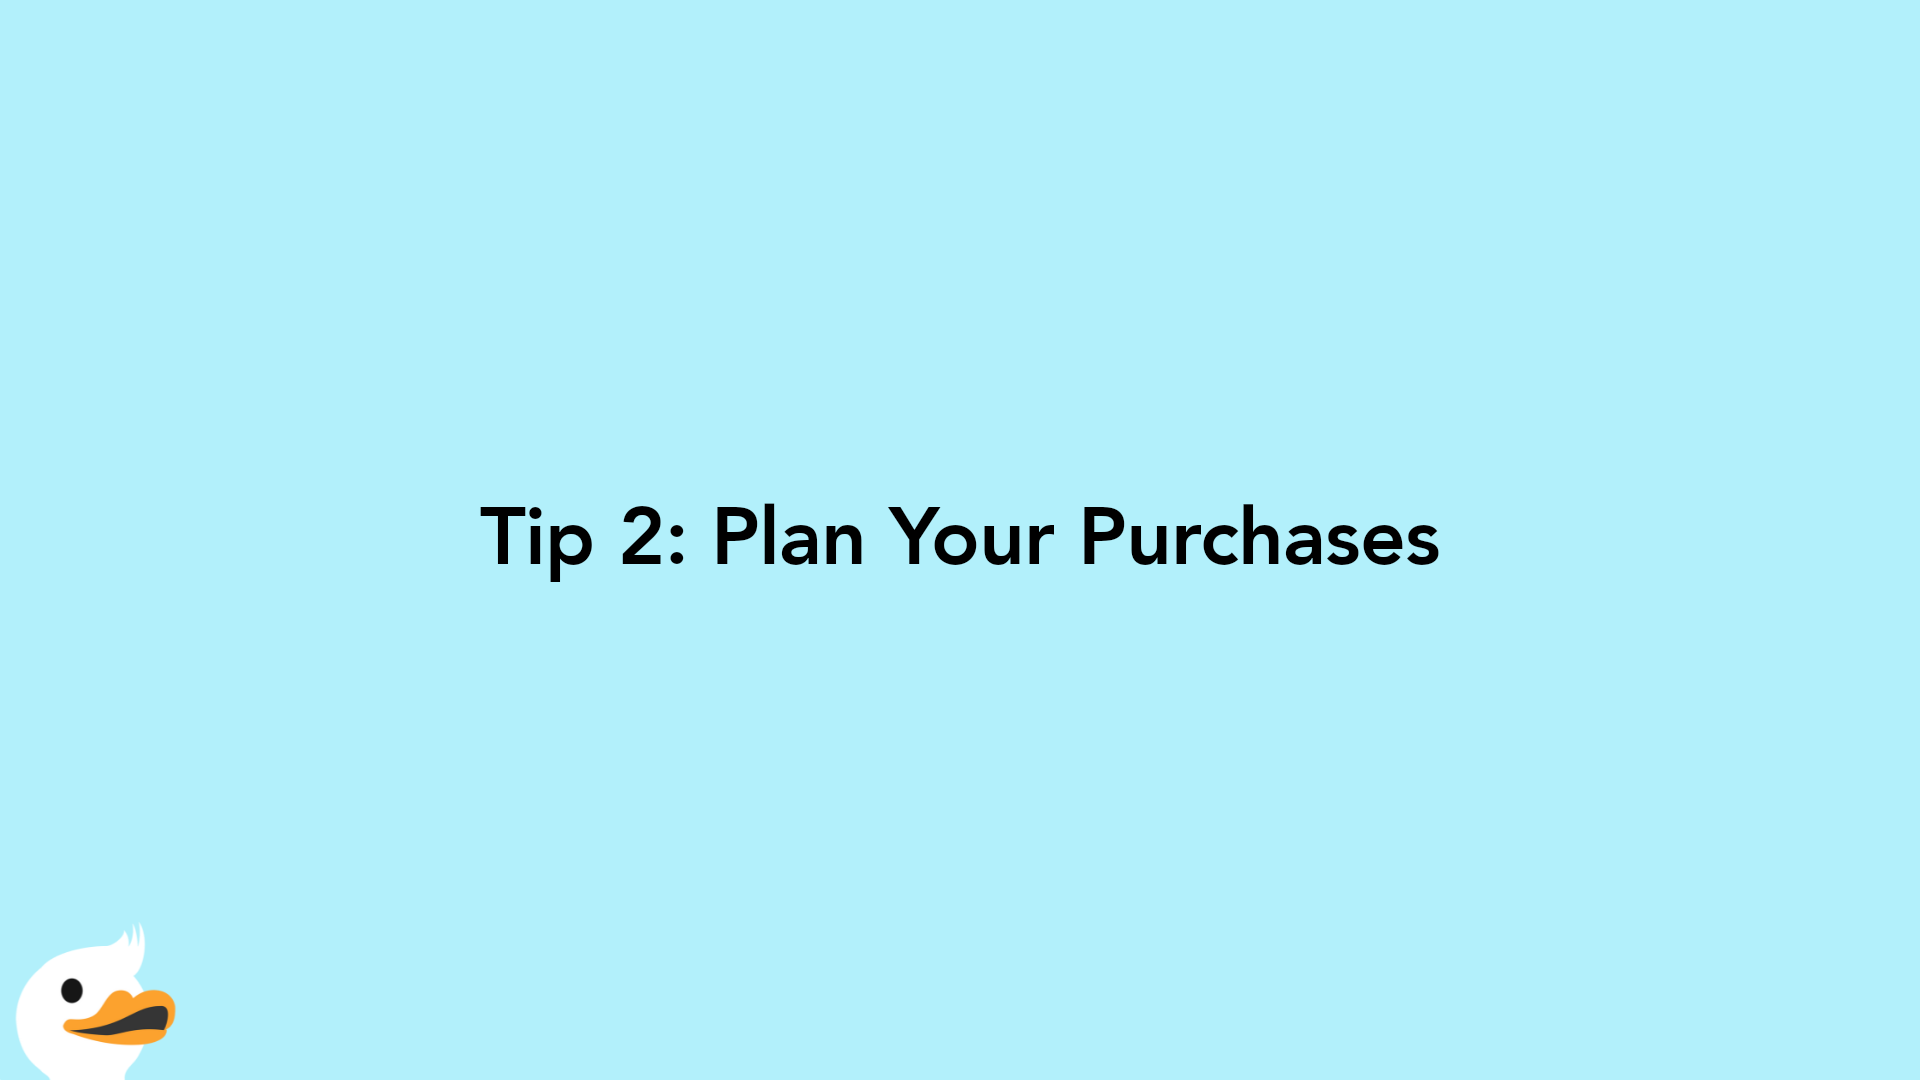 Tip 2: Plan Your Purchases